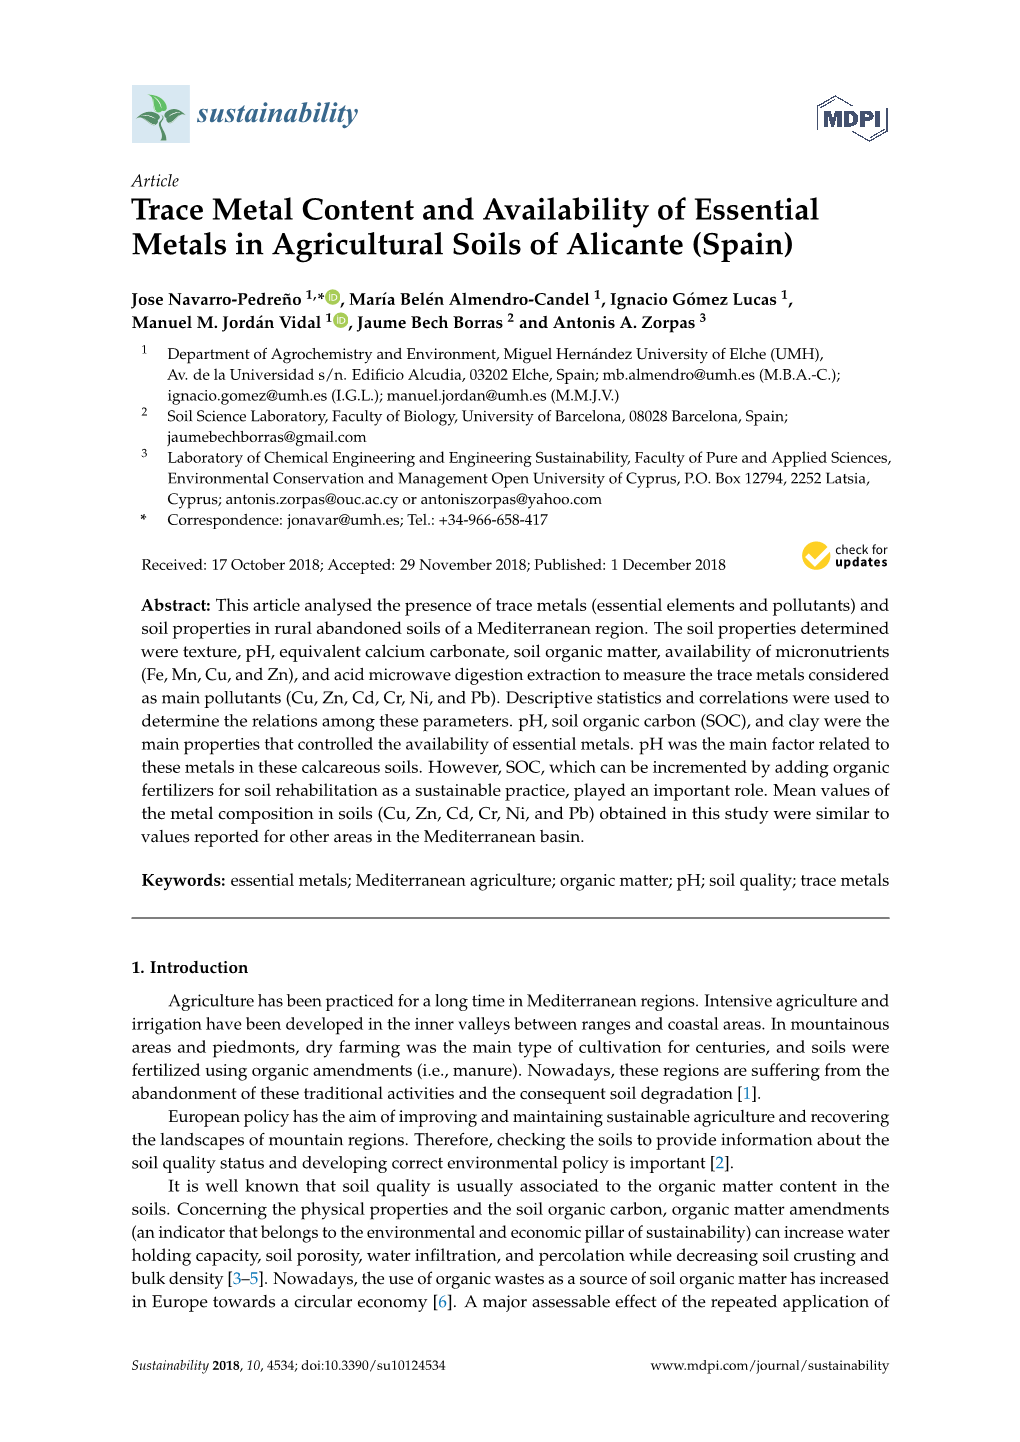 Trace Metal Content and Availability of Essential Metals in Agricultural Soils of Alicante (Spain)